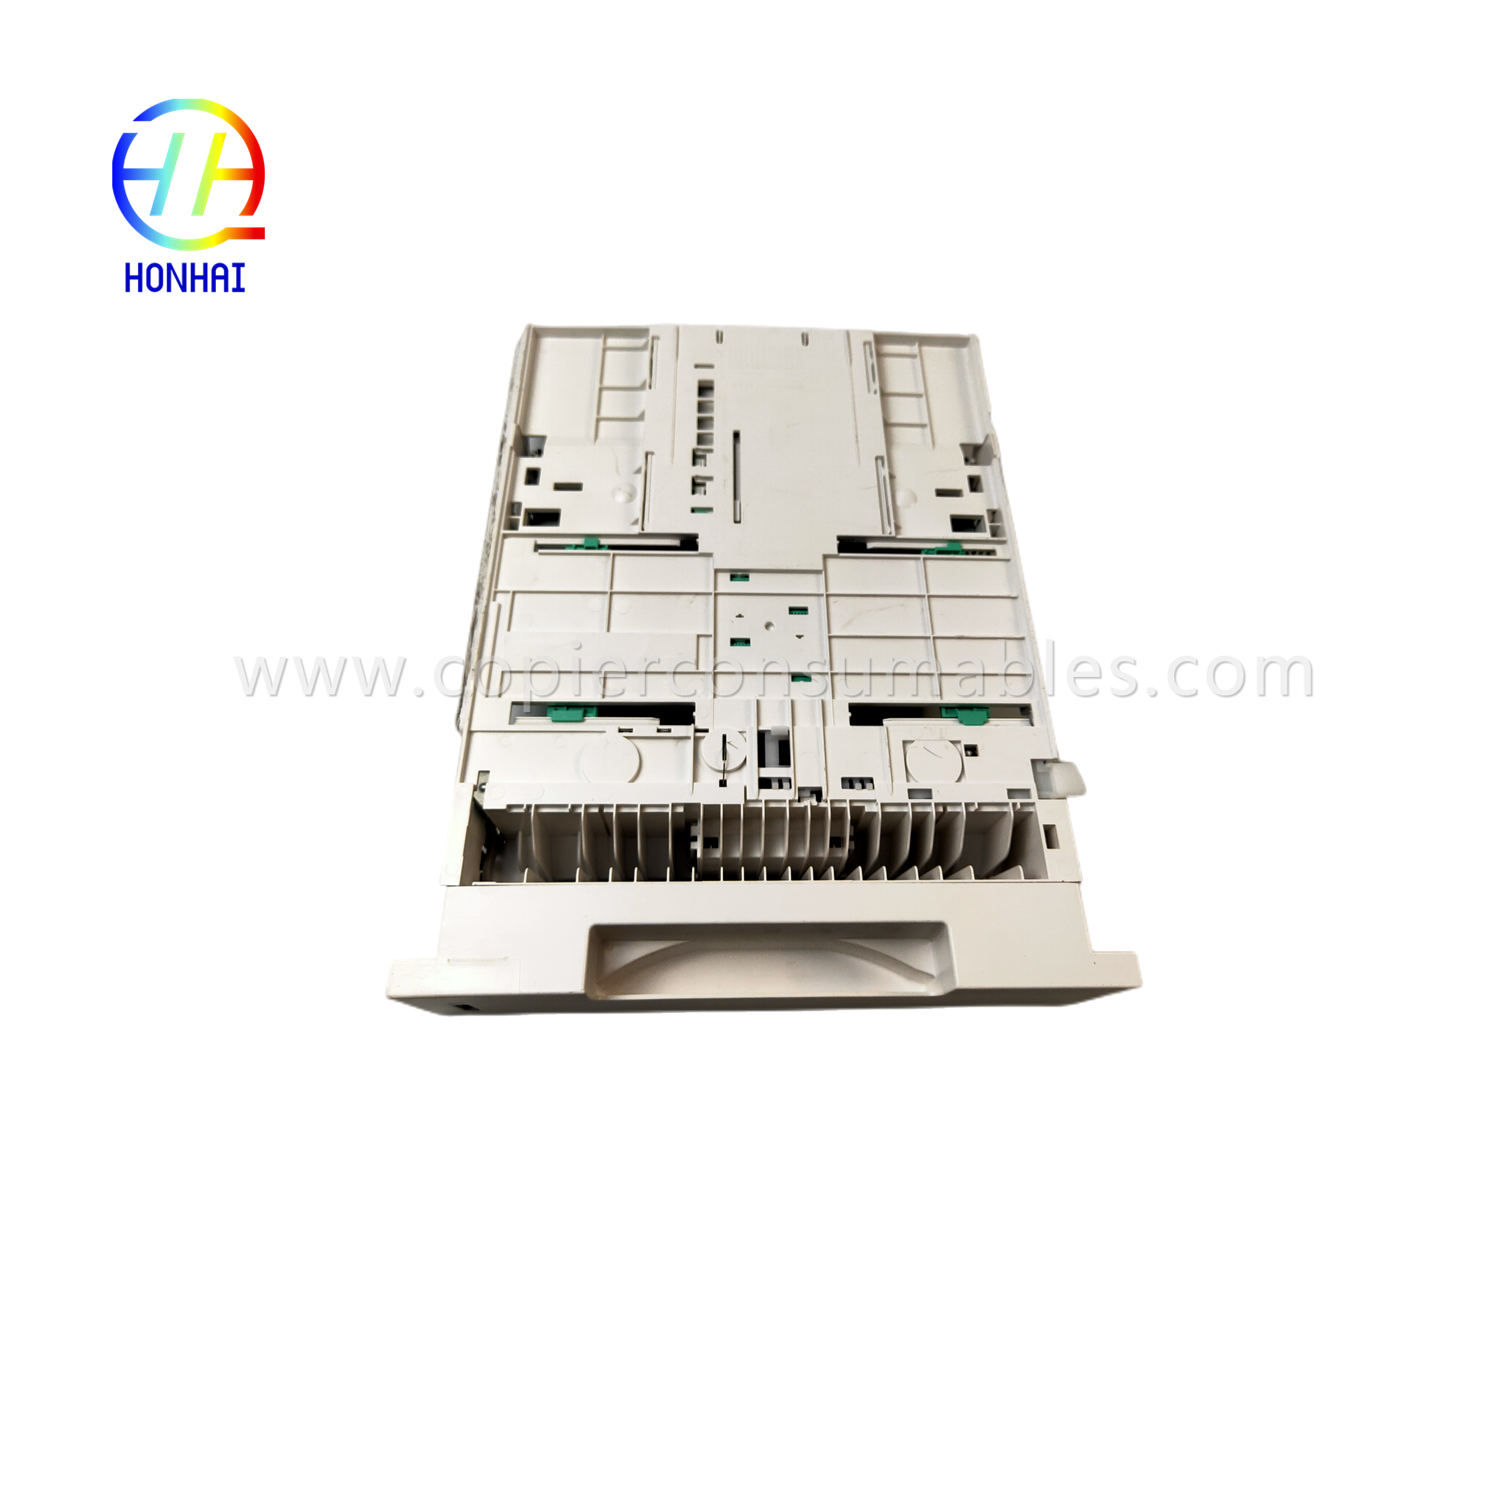 https://c585.goodo.net/paper-tray-assembly-for-xerox-phaser-3320dni-workcentre-3315dn-3325dni-050n00650-ካሴት-የወረቀት-ትሪ-ምርት/